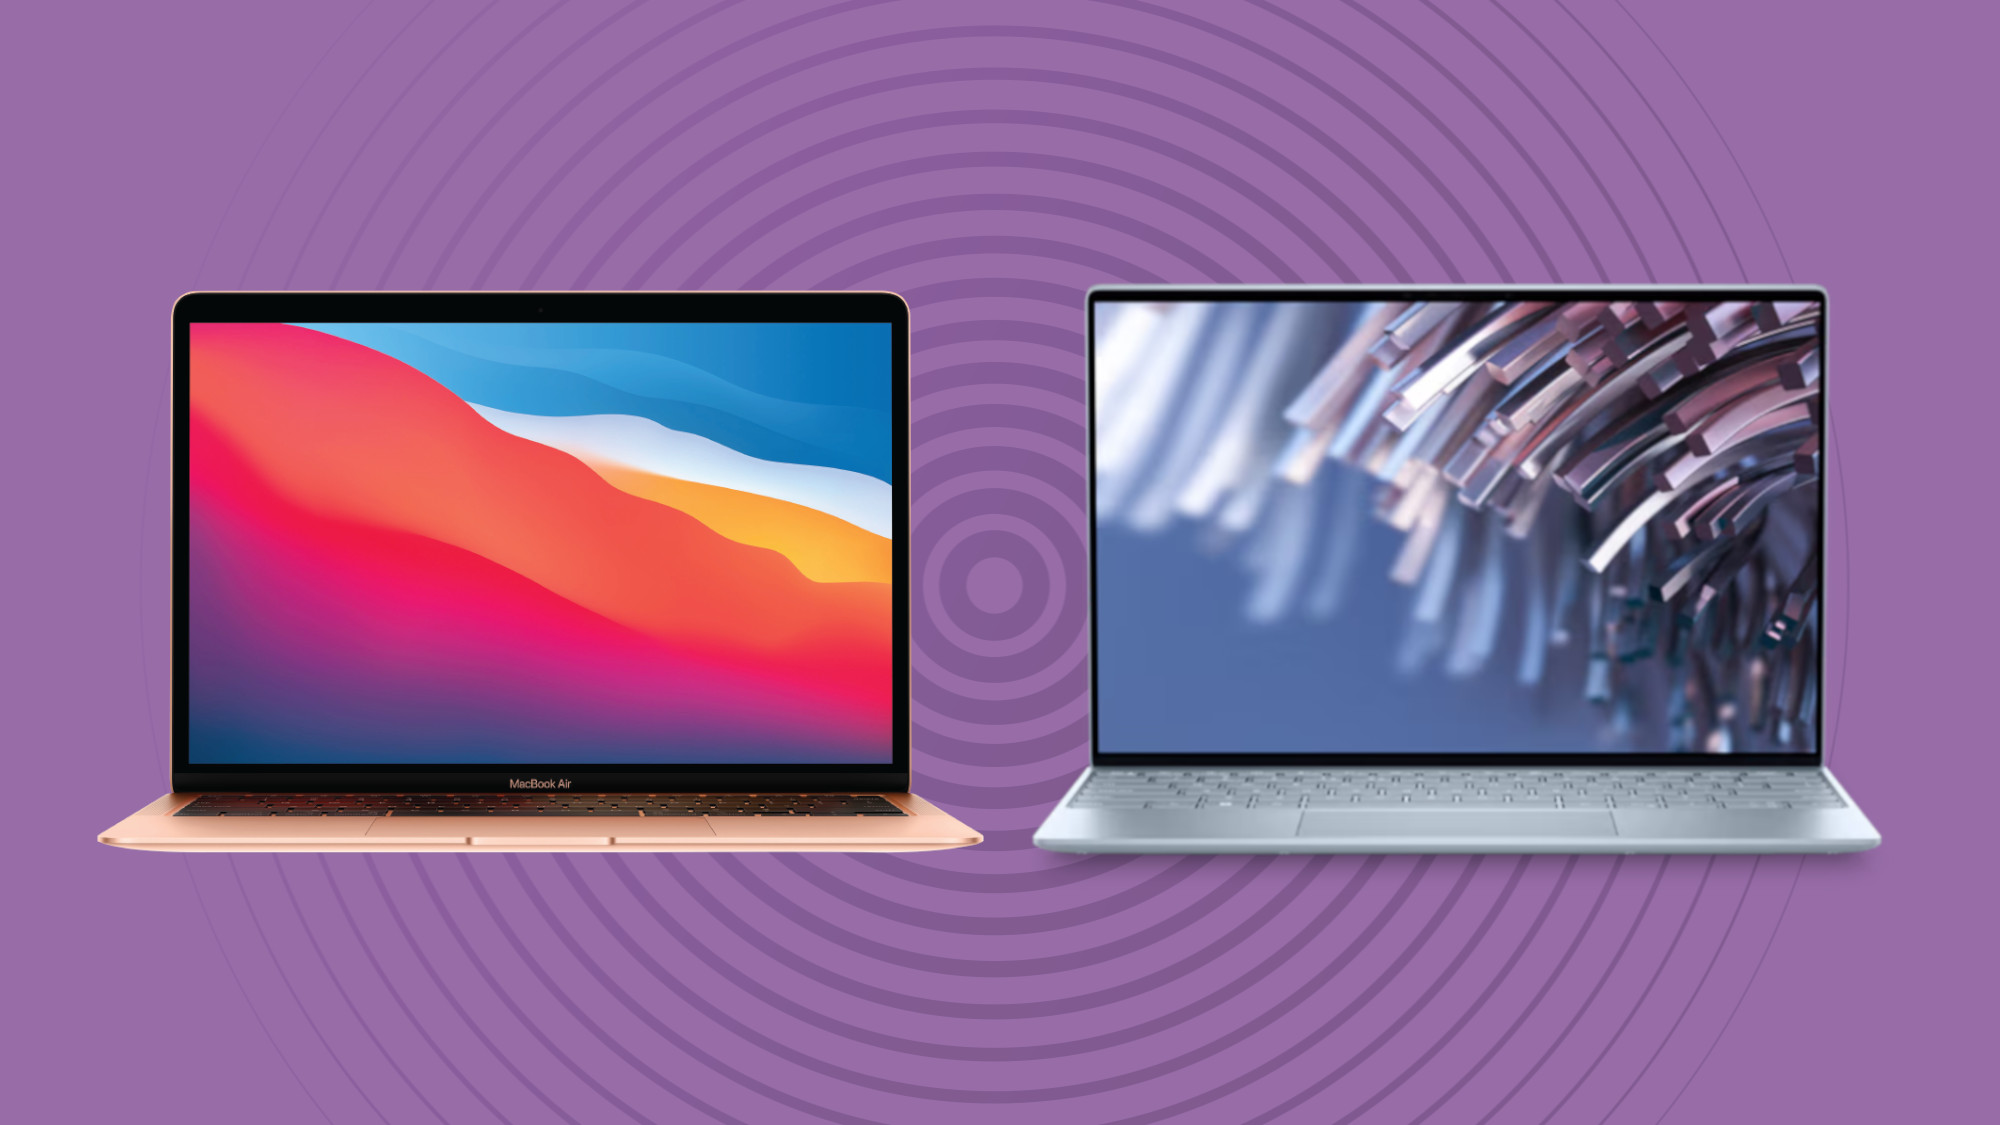 You can get a MacBook Air for $699 and a Dell XPS 13 for just $599 - is this the best time ever for laptop buyers?